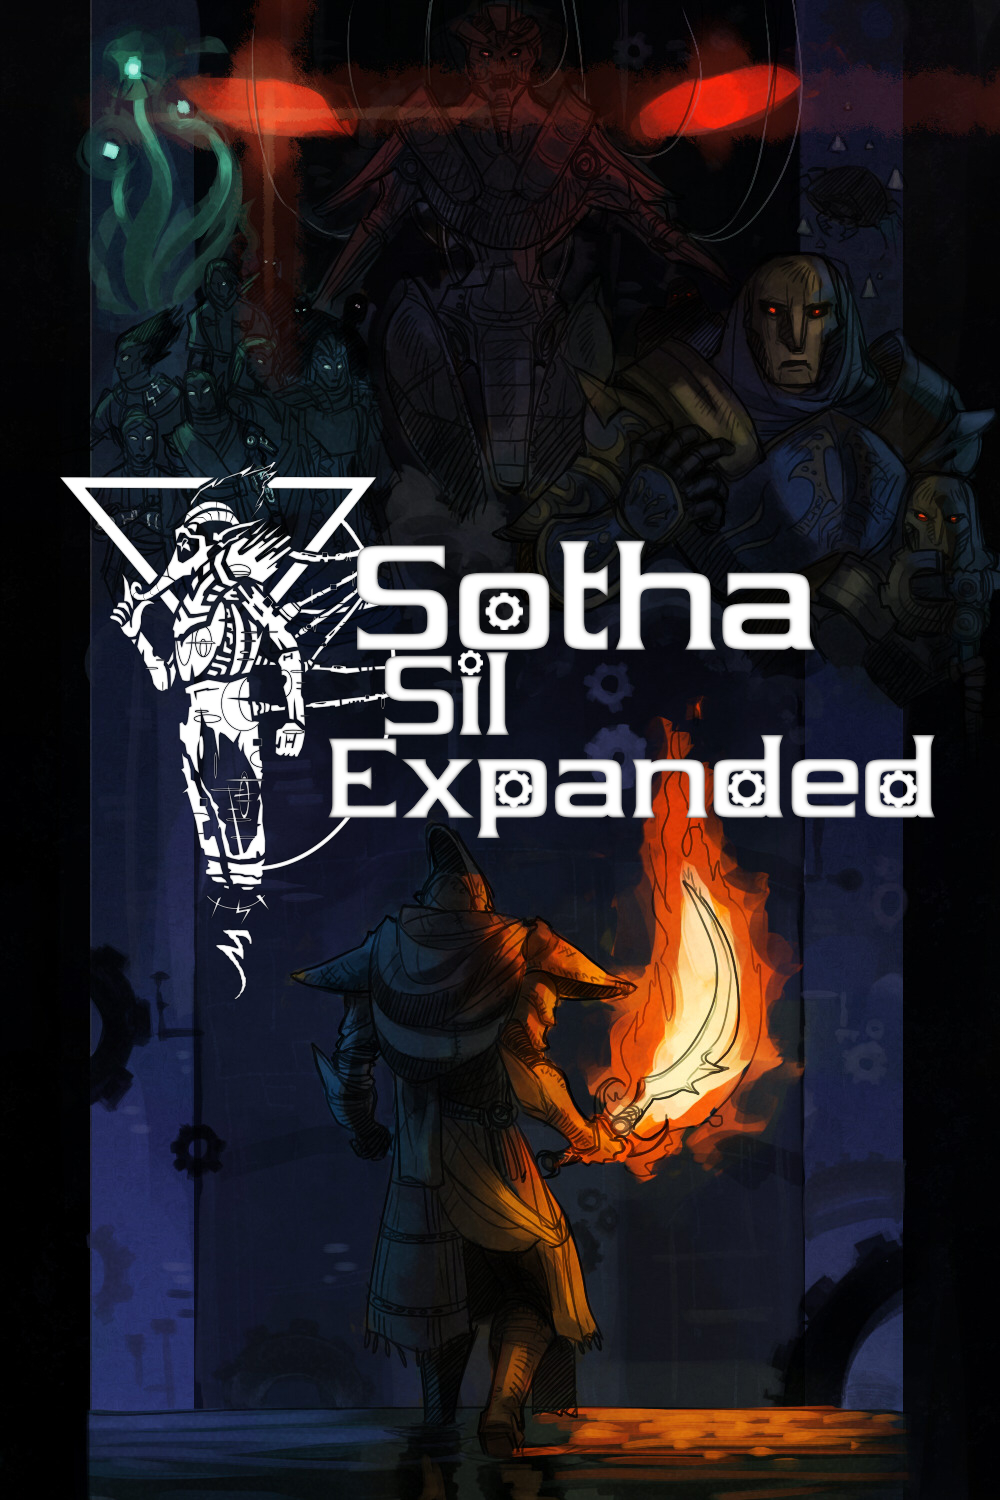 Morrowind rebirth and sotha sil expanded